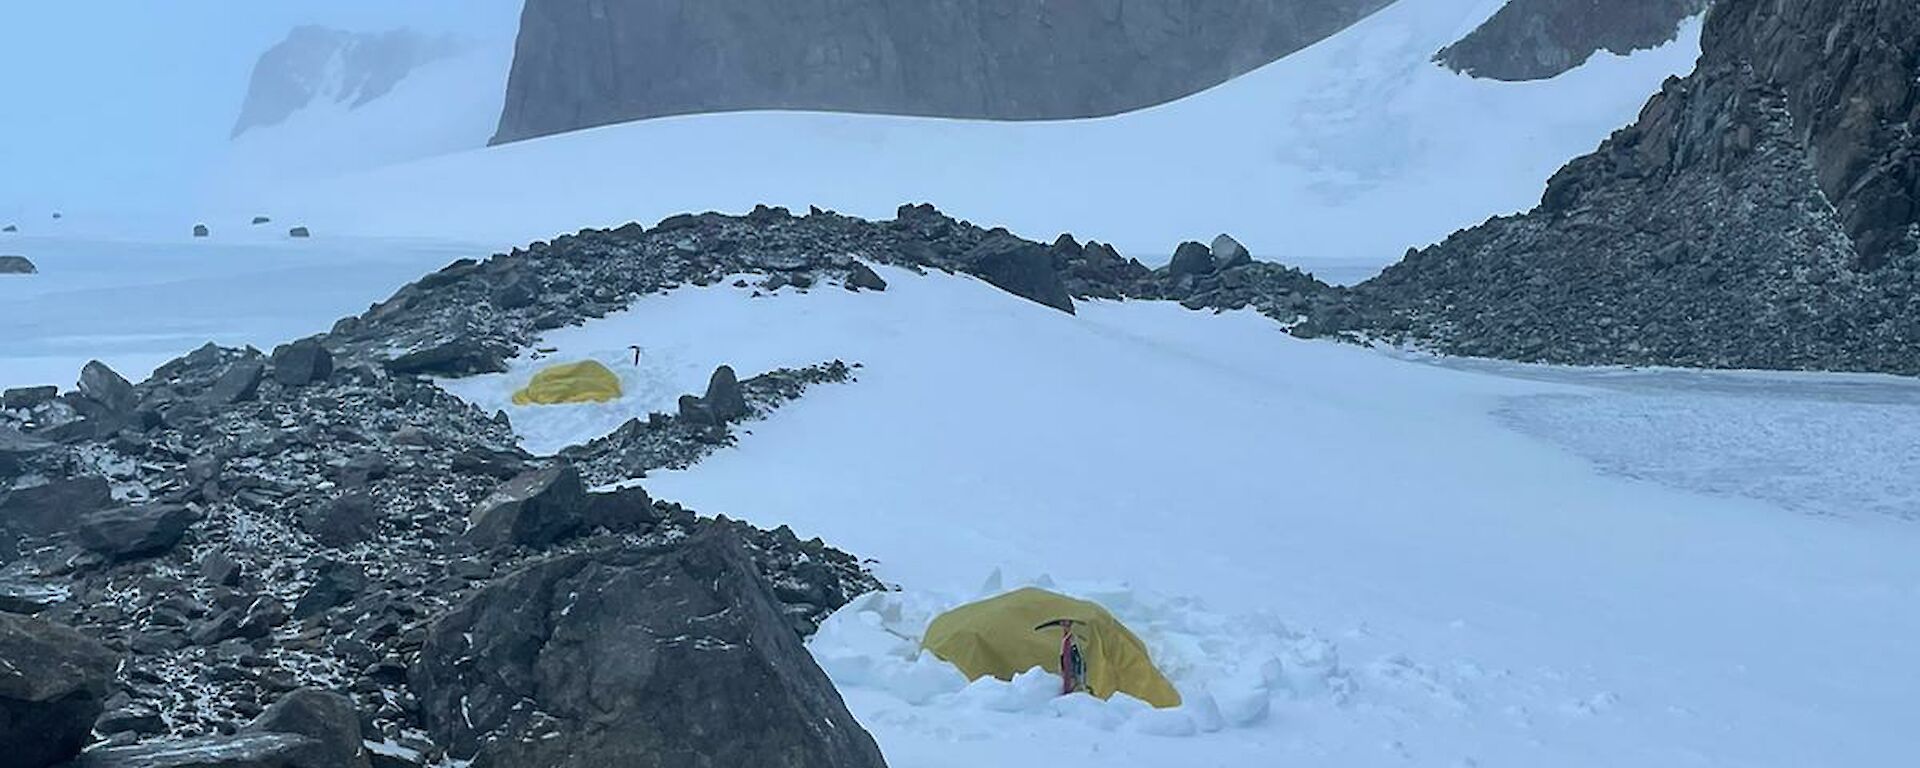 An expeditioner inside a yellow survival bivvie surrounded by snow and rocks